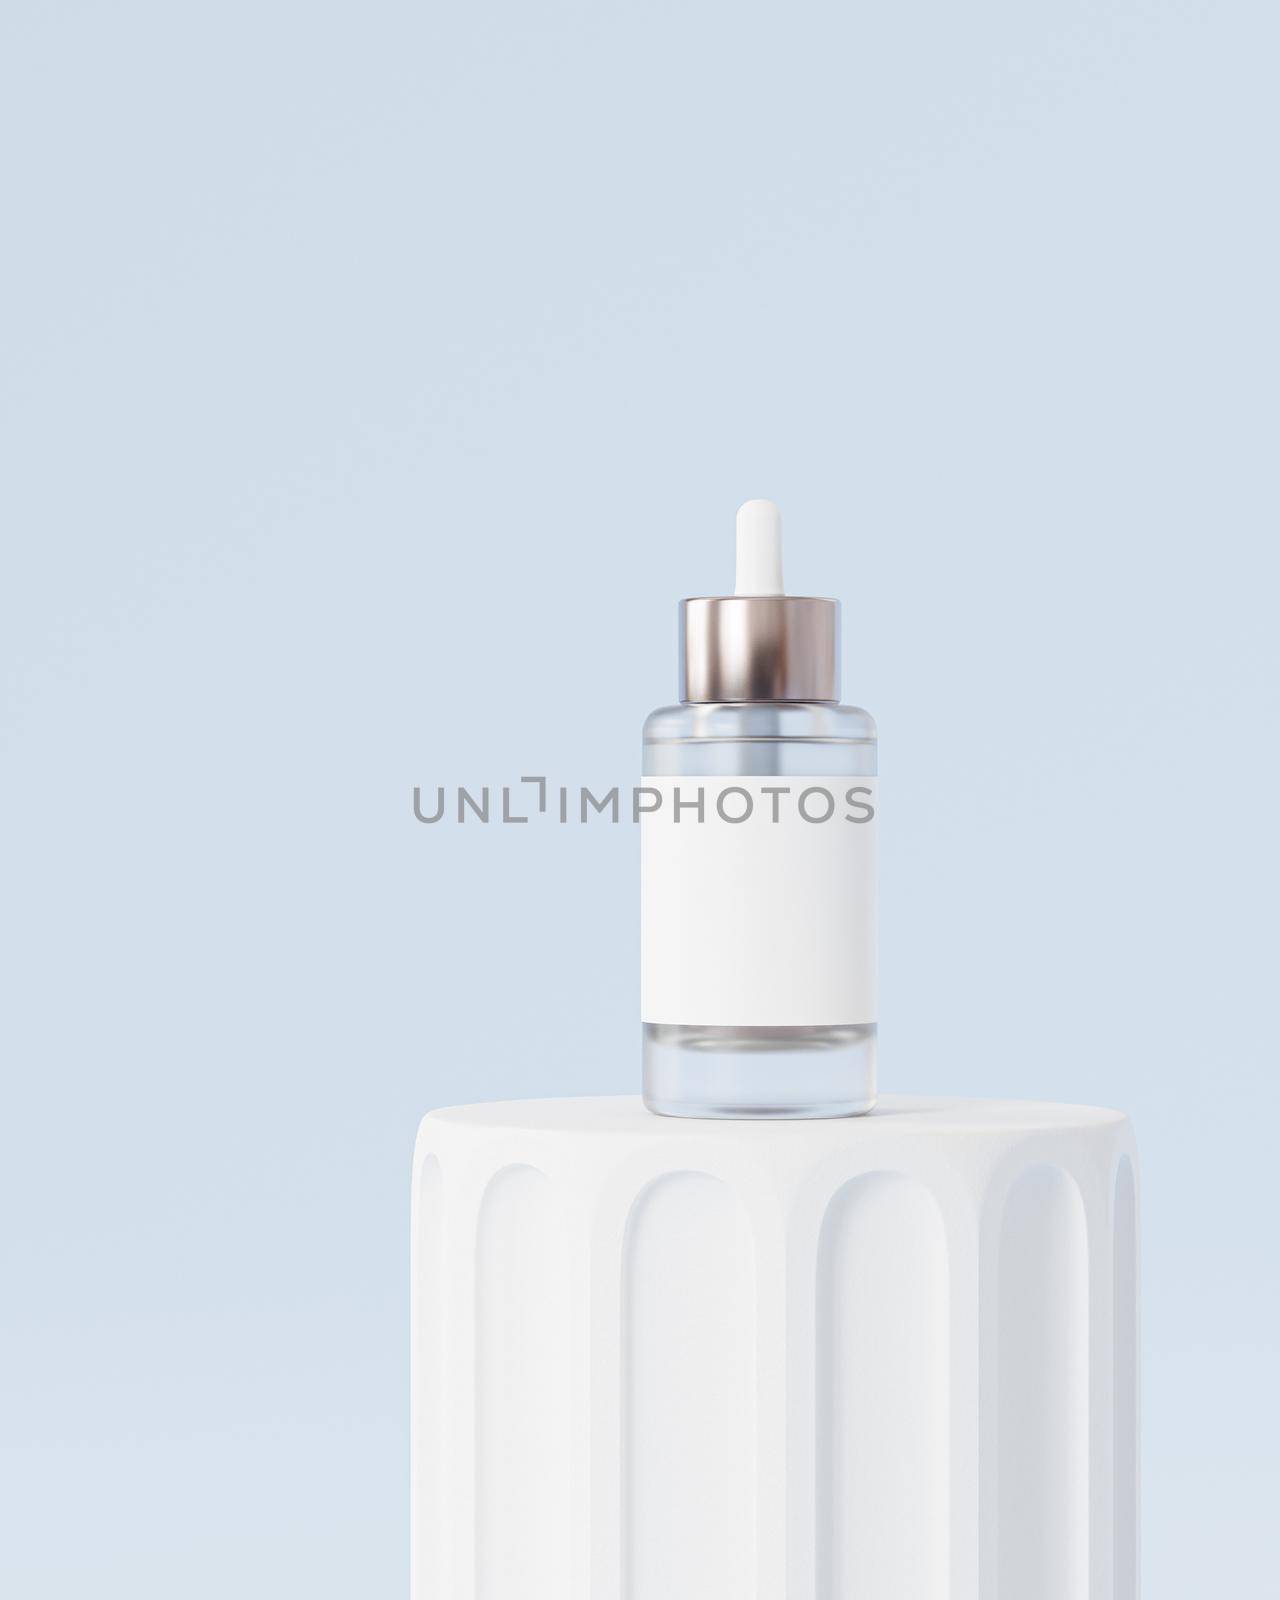 Mockup glass bottle dropper with label for cosmetics, care products or advertising, on pillar podium, 3d illustration render